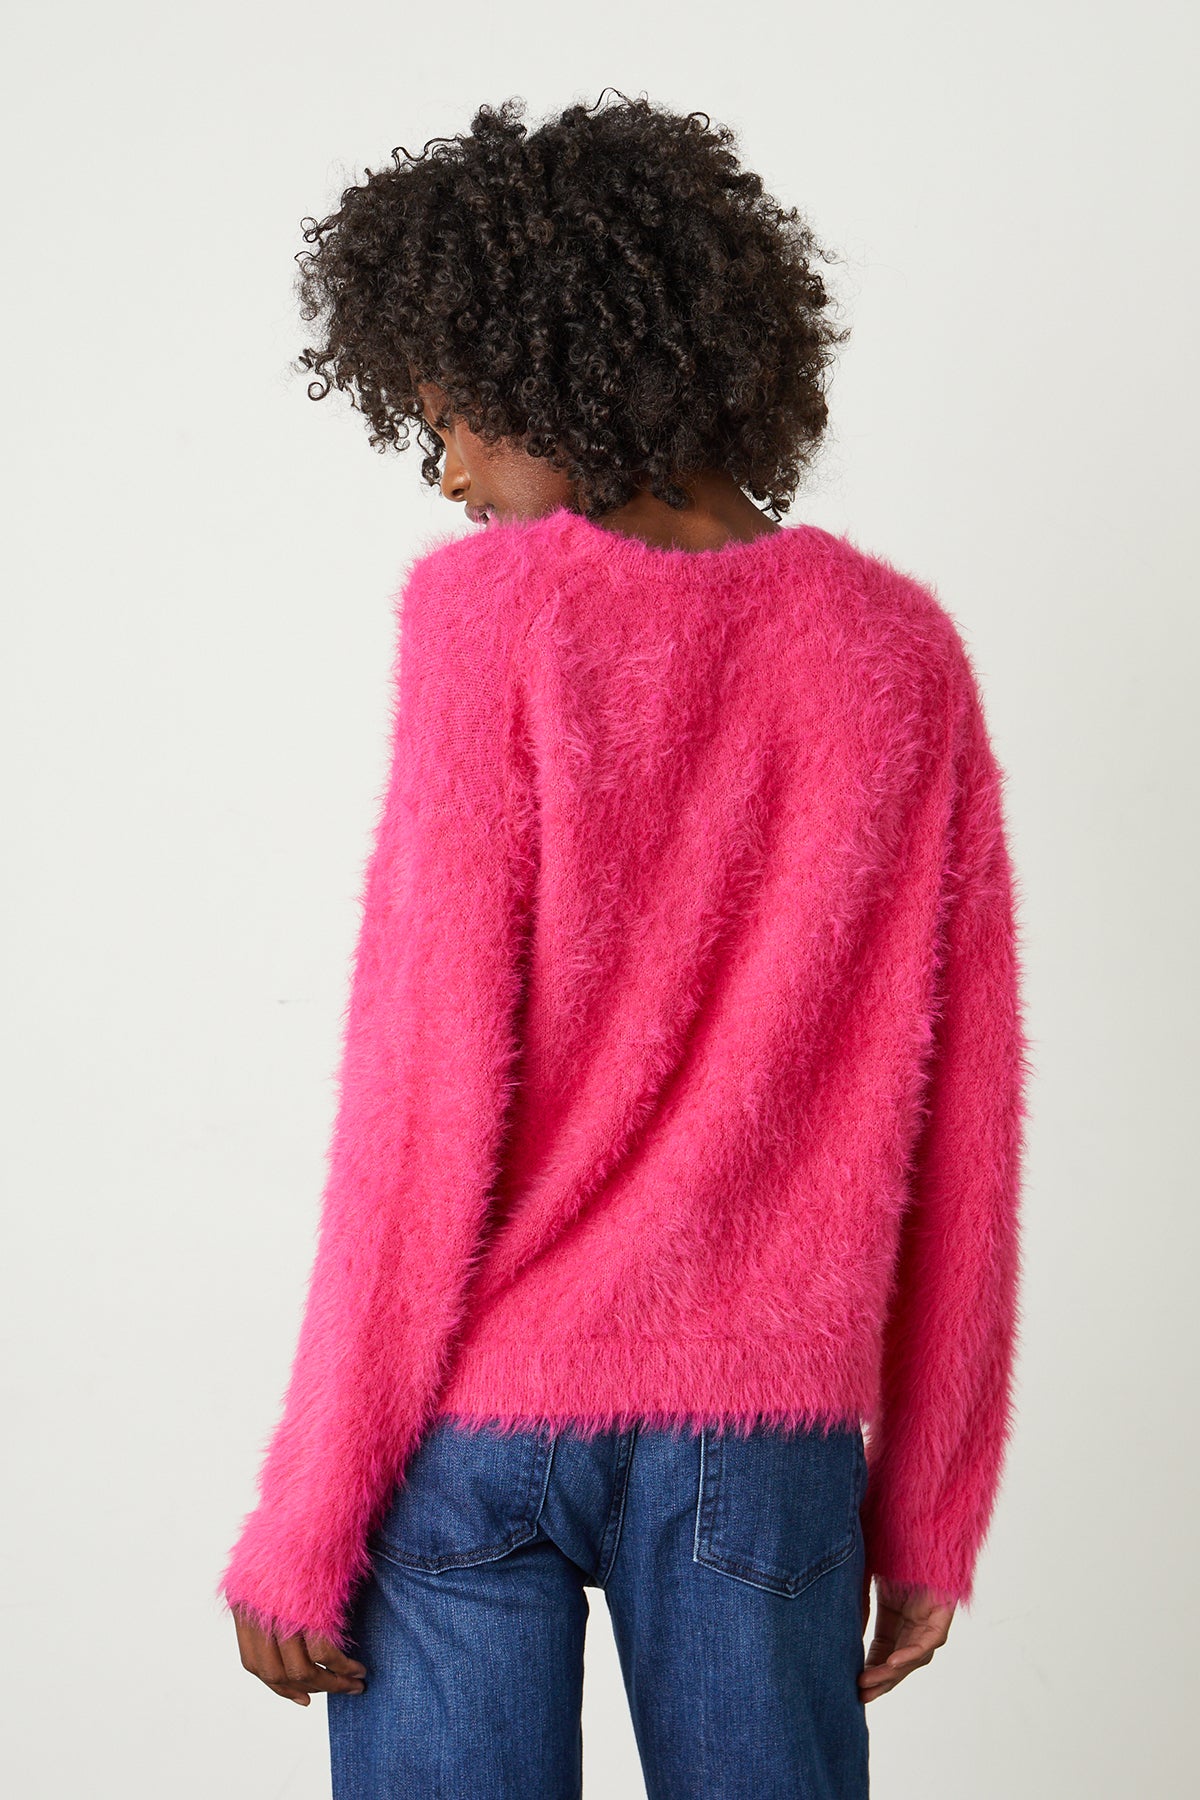 Ray Feather Yarn Crew Neck Sweater in hot pink back-25444377460929